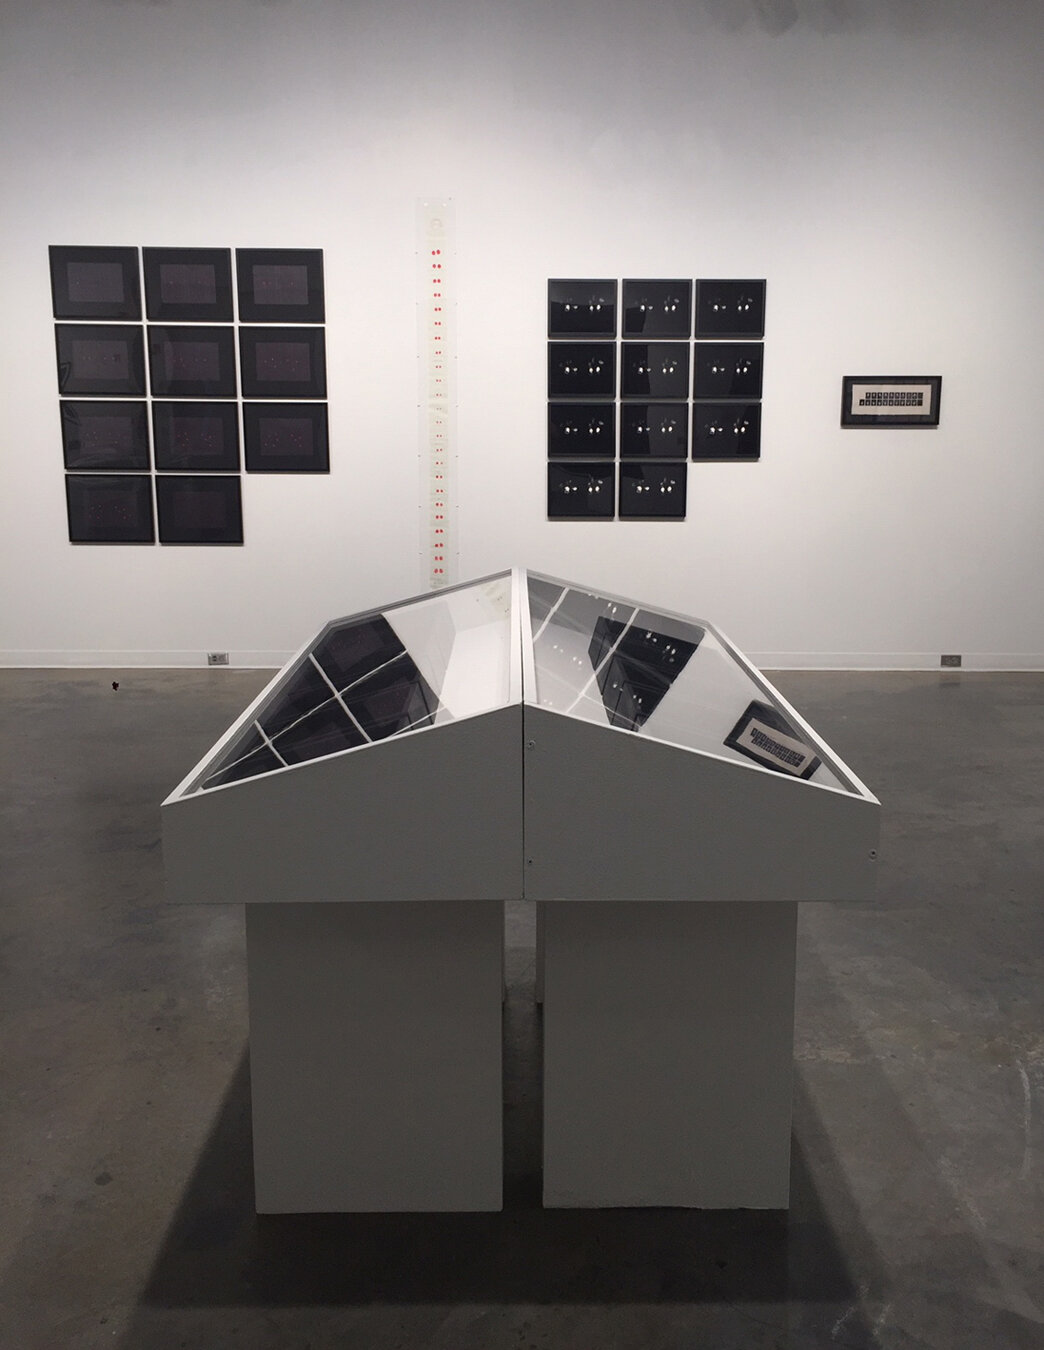   November: Improbability Game  Eleven Dice Boxes and Forty-five Gemini Dice 4” x 9” x 12” each box (installed dimensions variable) 2018 